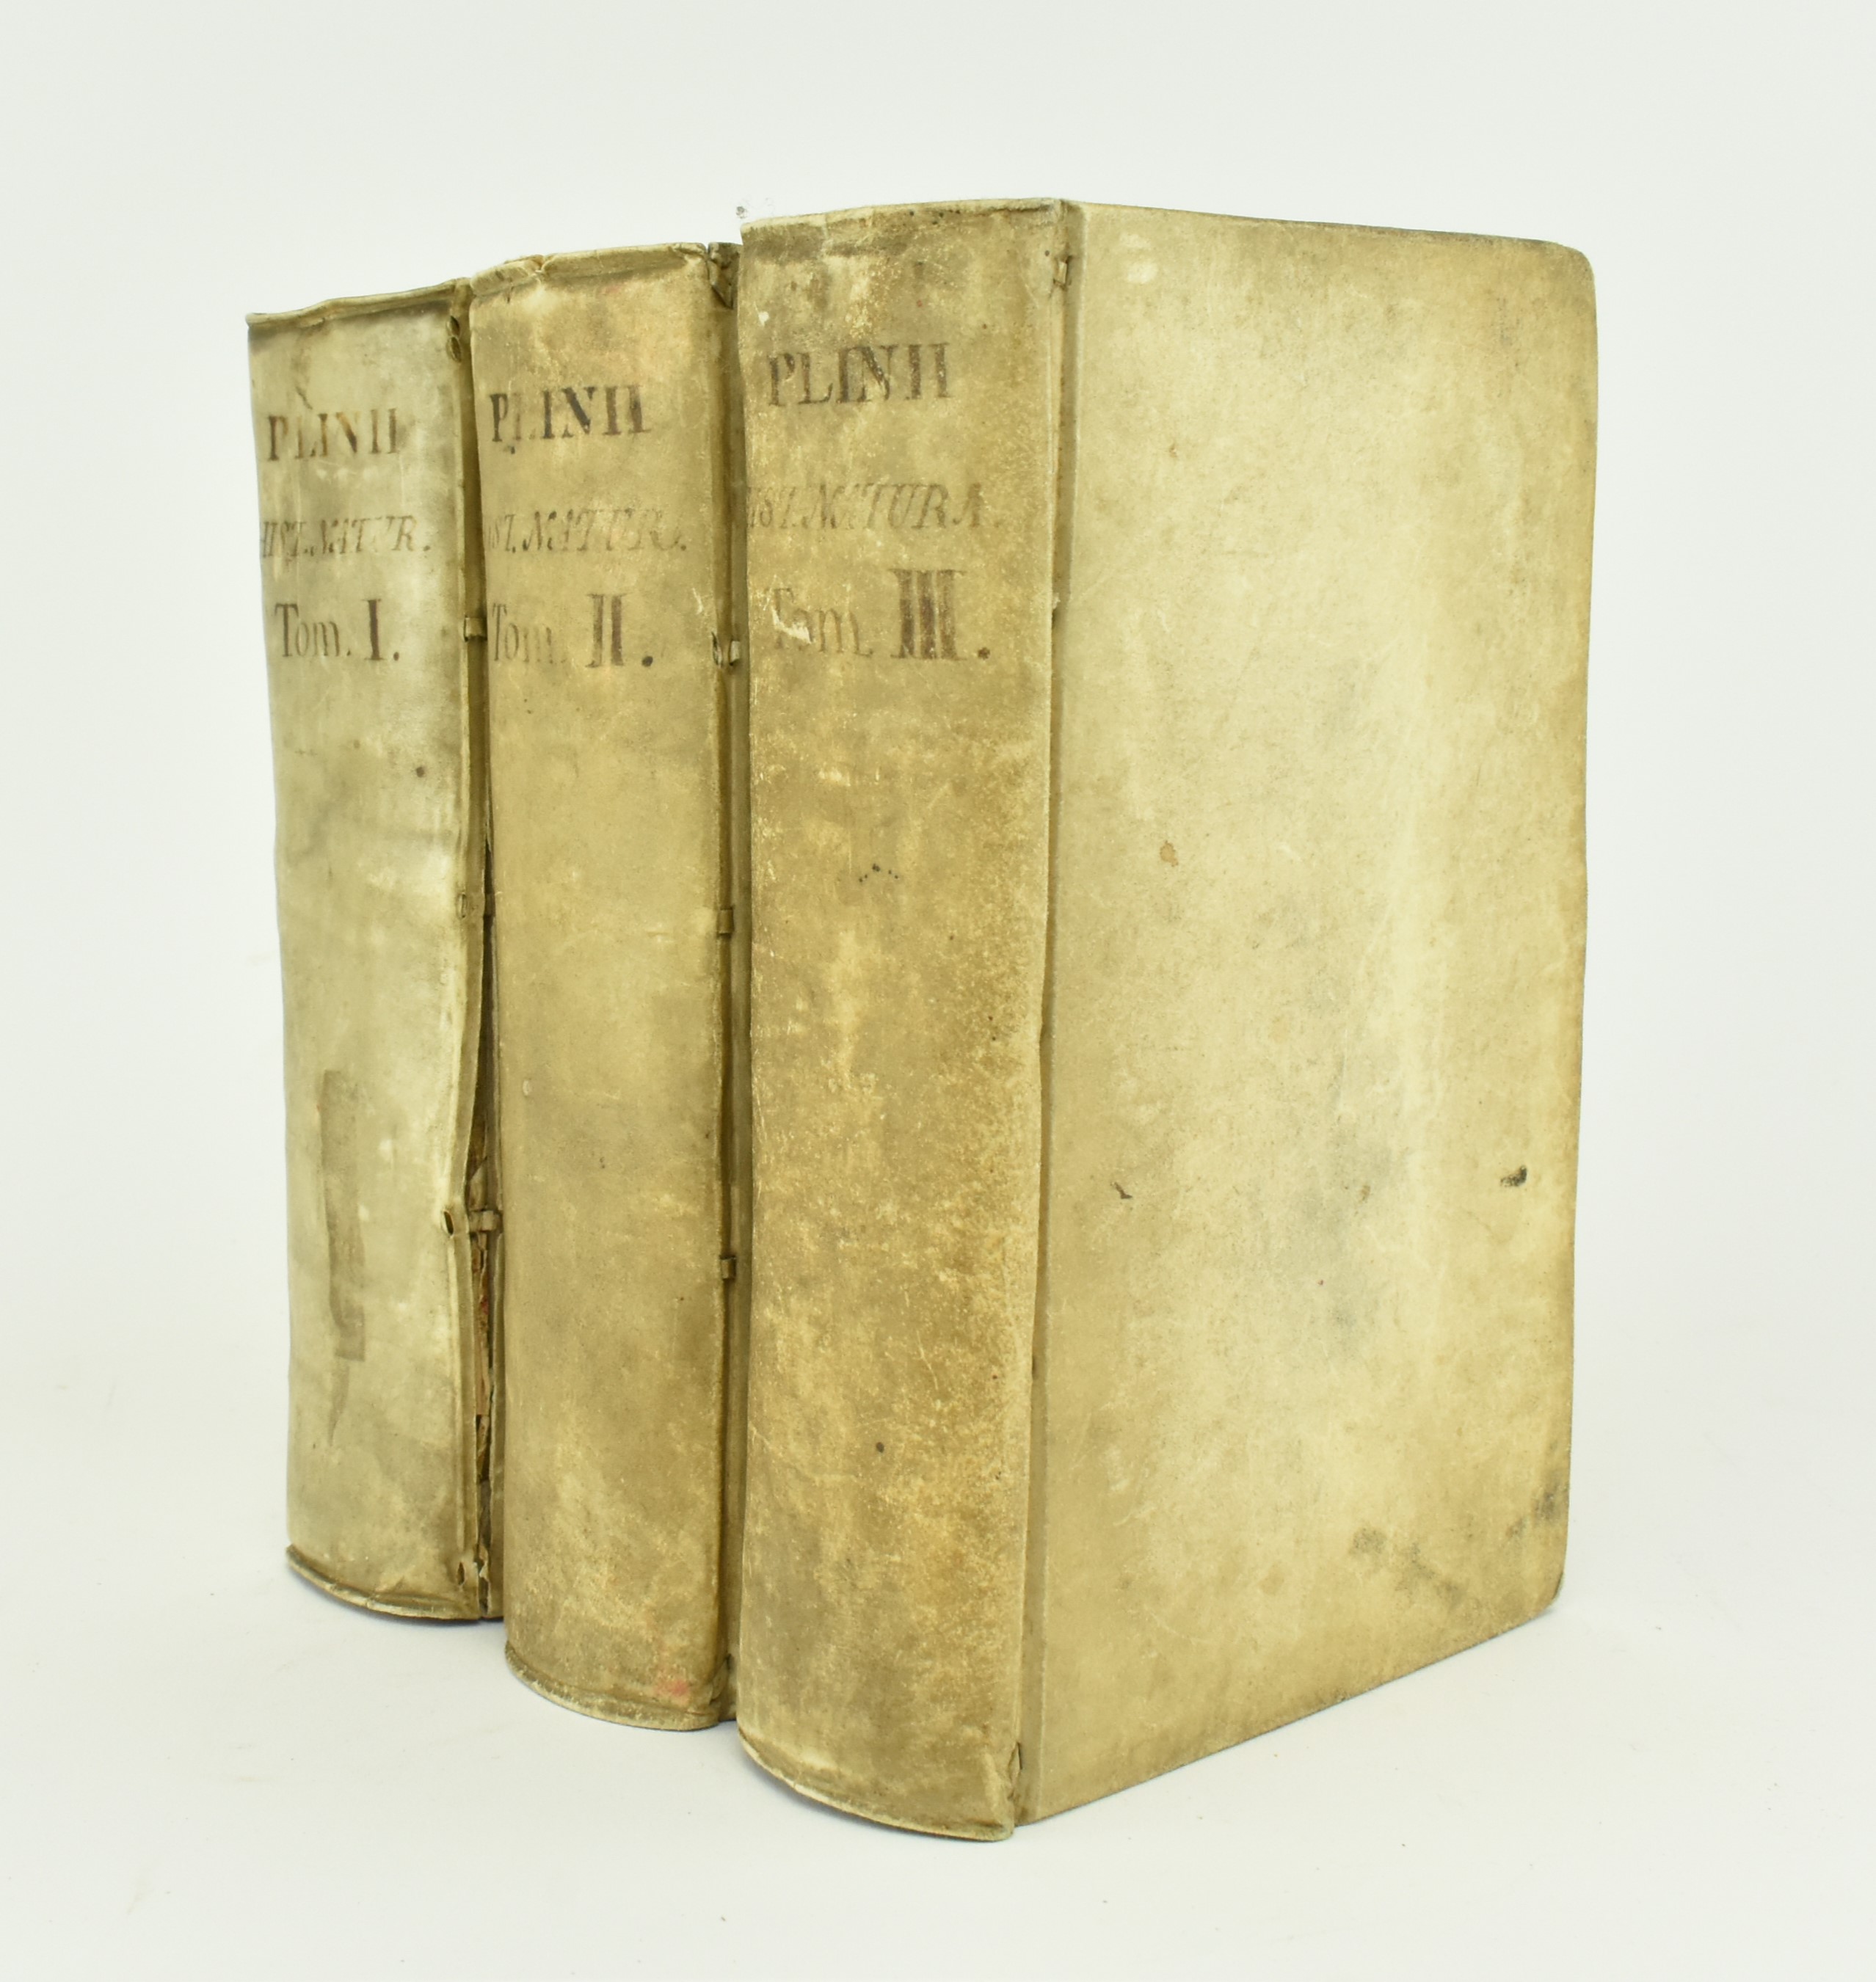 1669 PLINY'S NATURAL HISTORY IN THREE VOLUMES, FULL VELLUM - Image 2 of 8